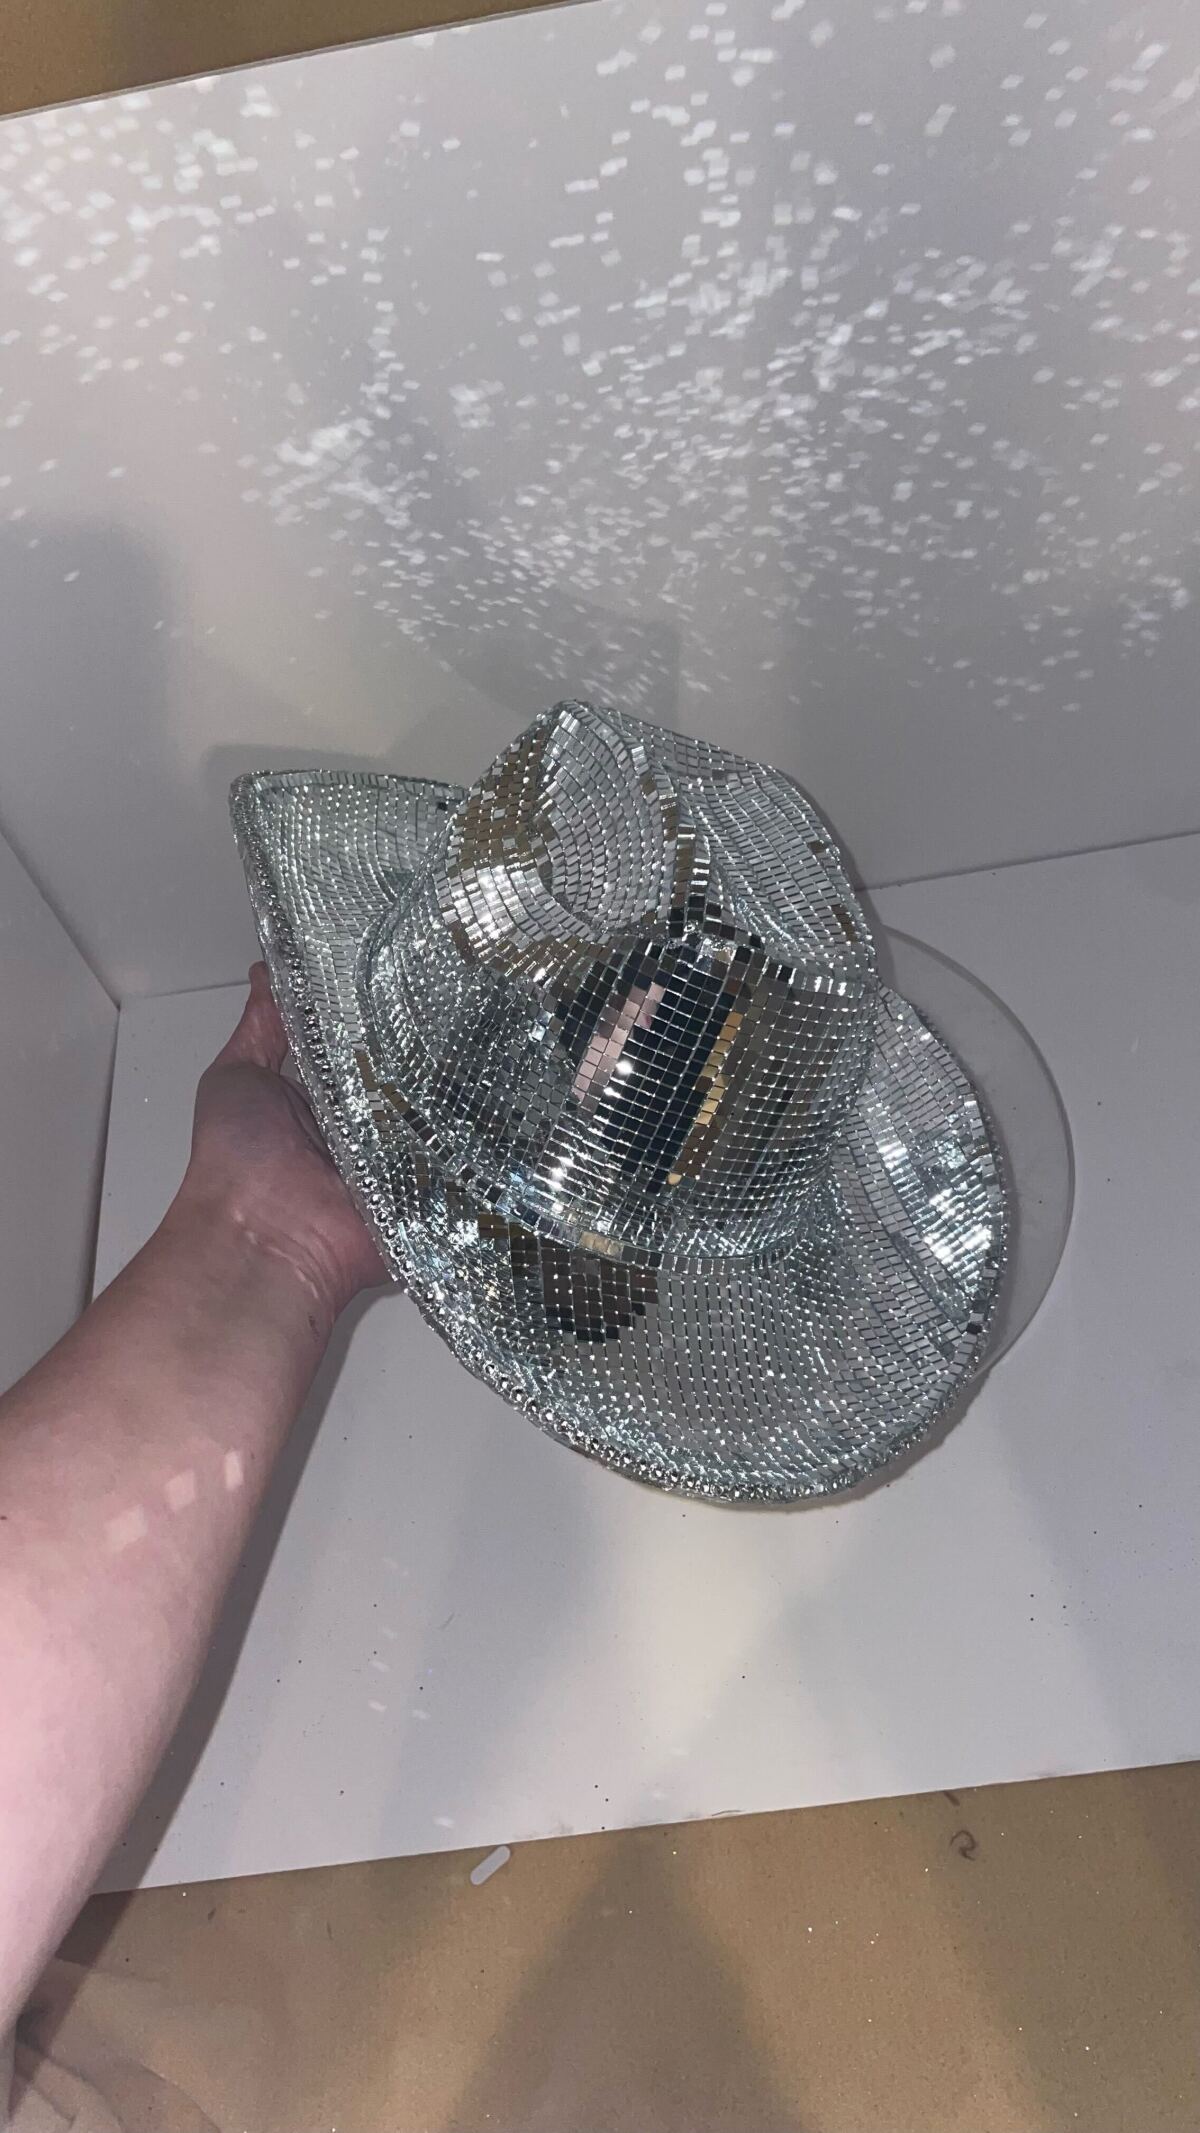 A cowboy hat covered in disco ball tiles, held up toward ceiling with light refracting onto the walls